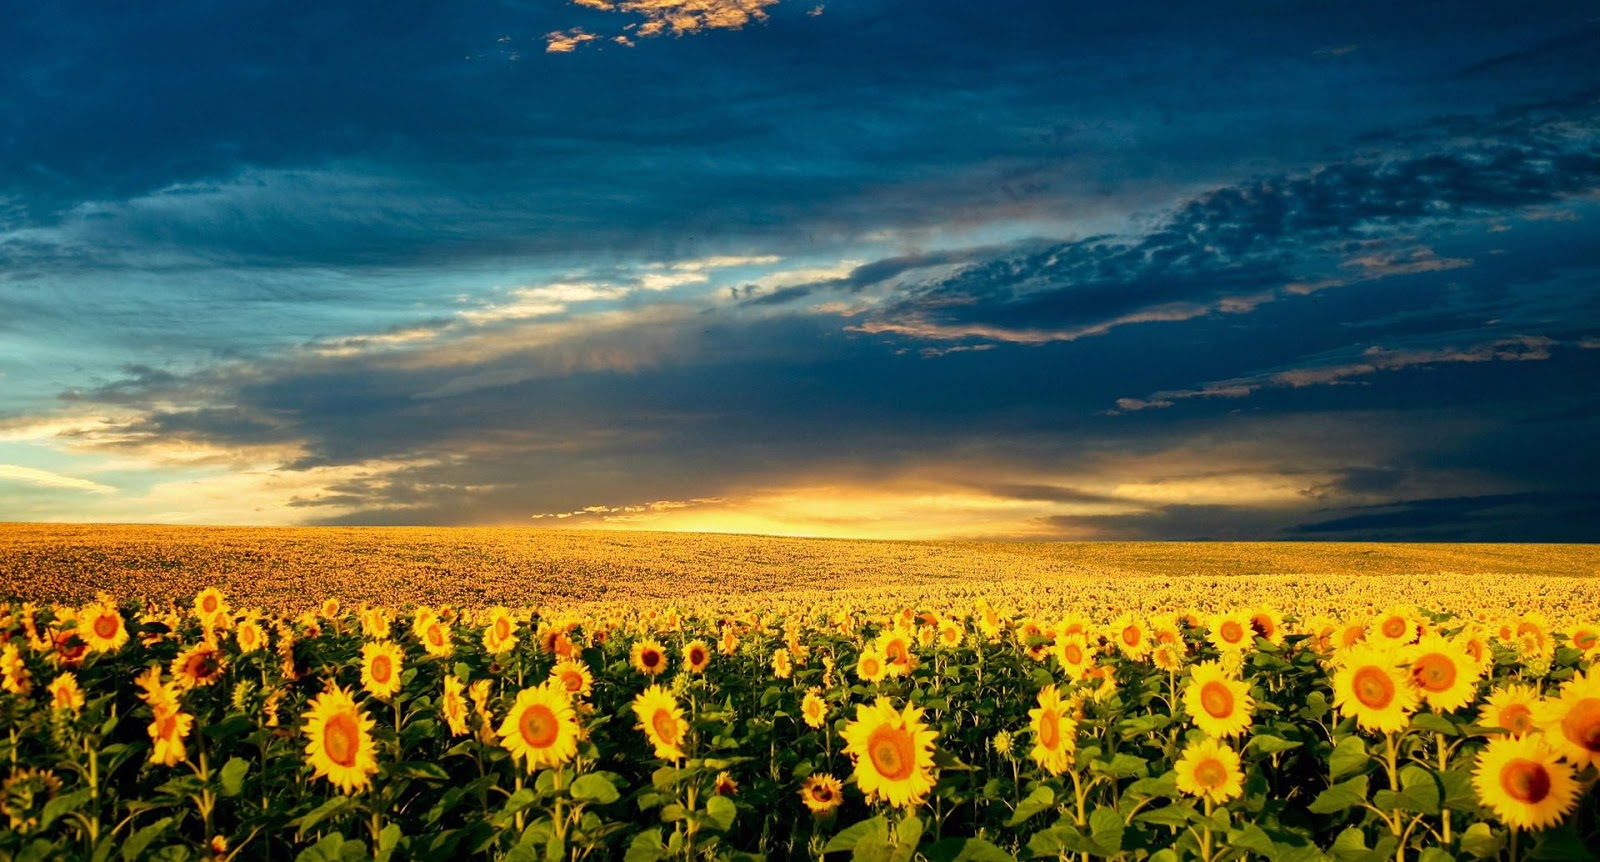 amazing wallpapers 1080p,sky,people in nature,nature,sunflower,field